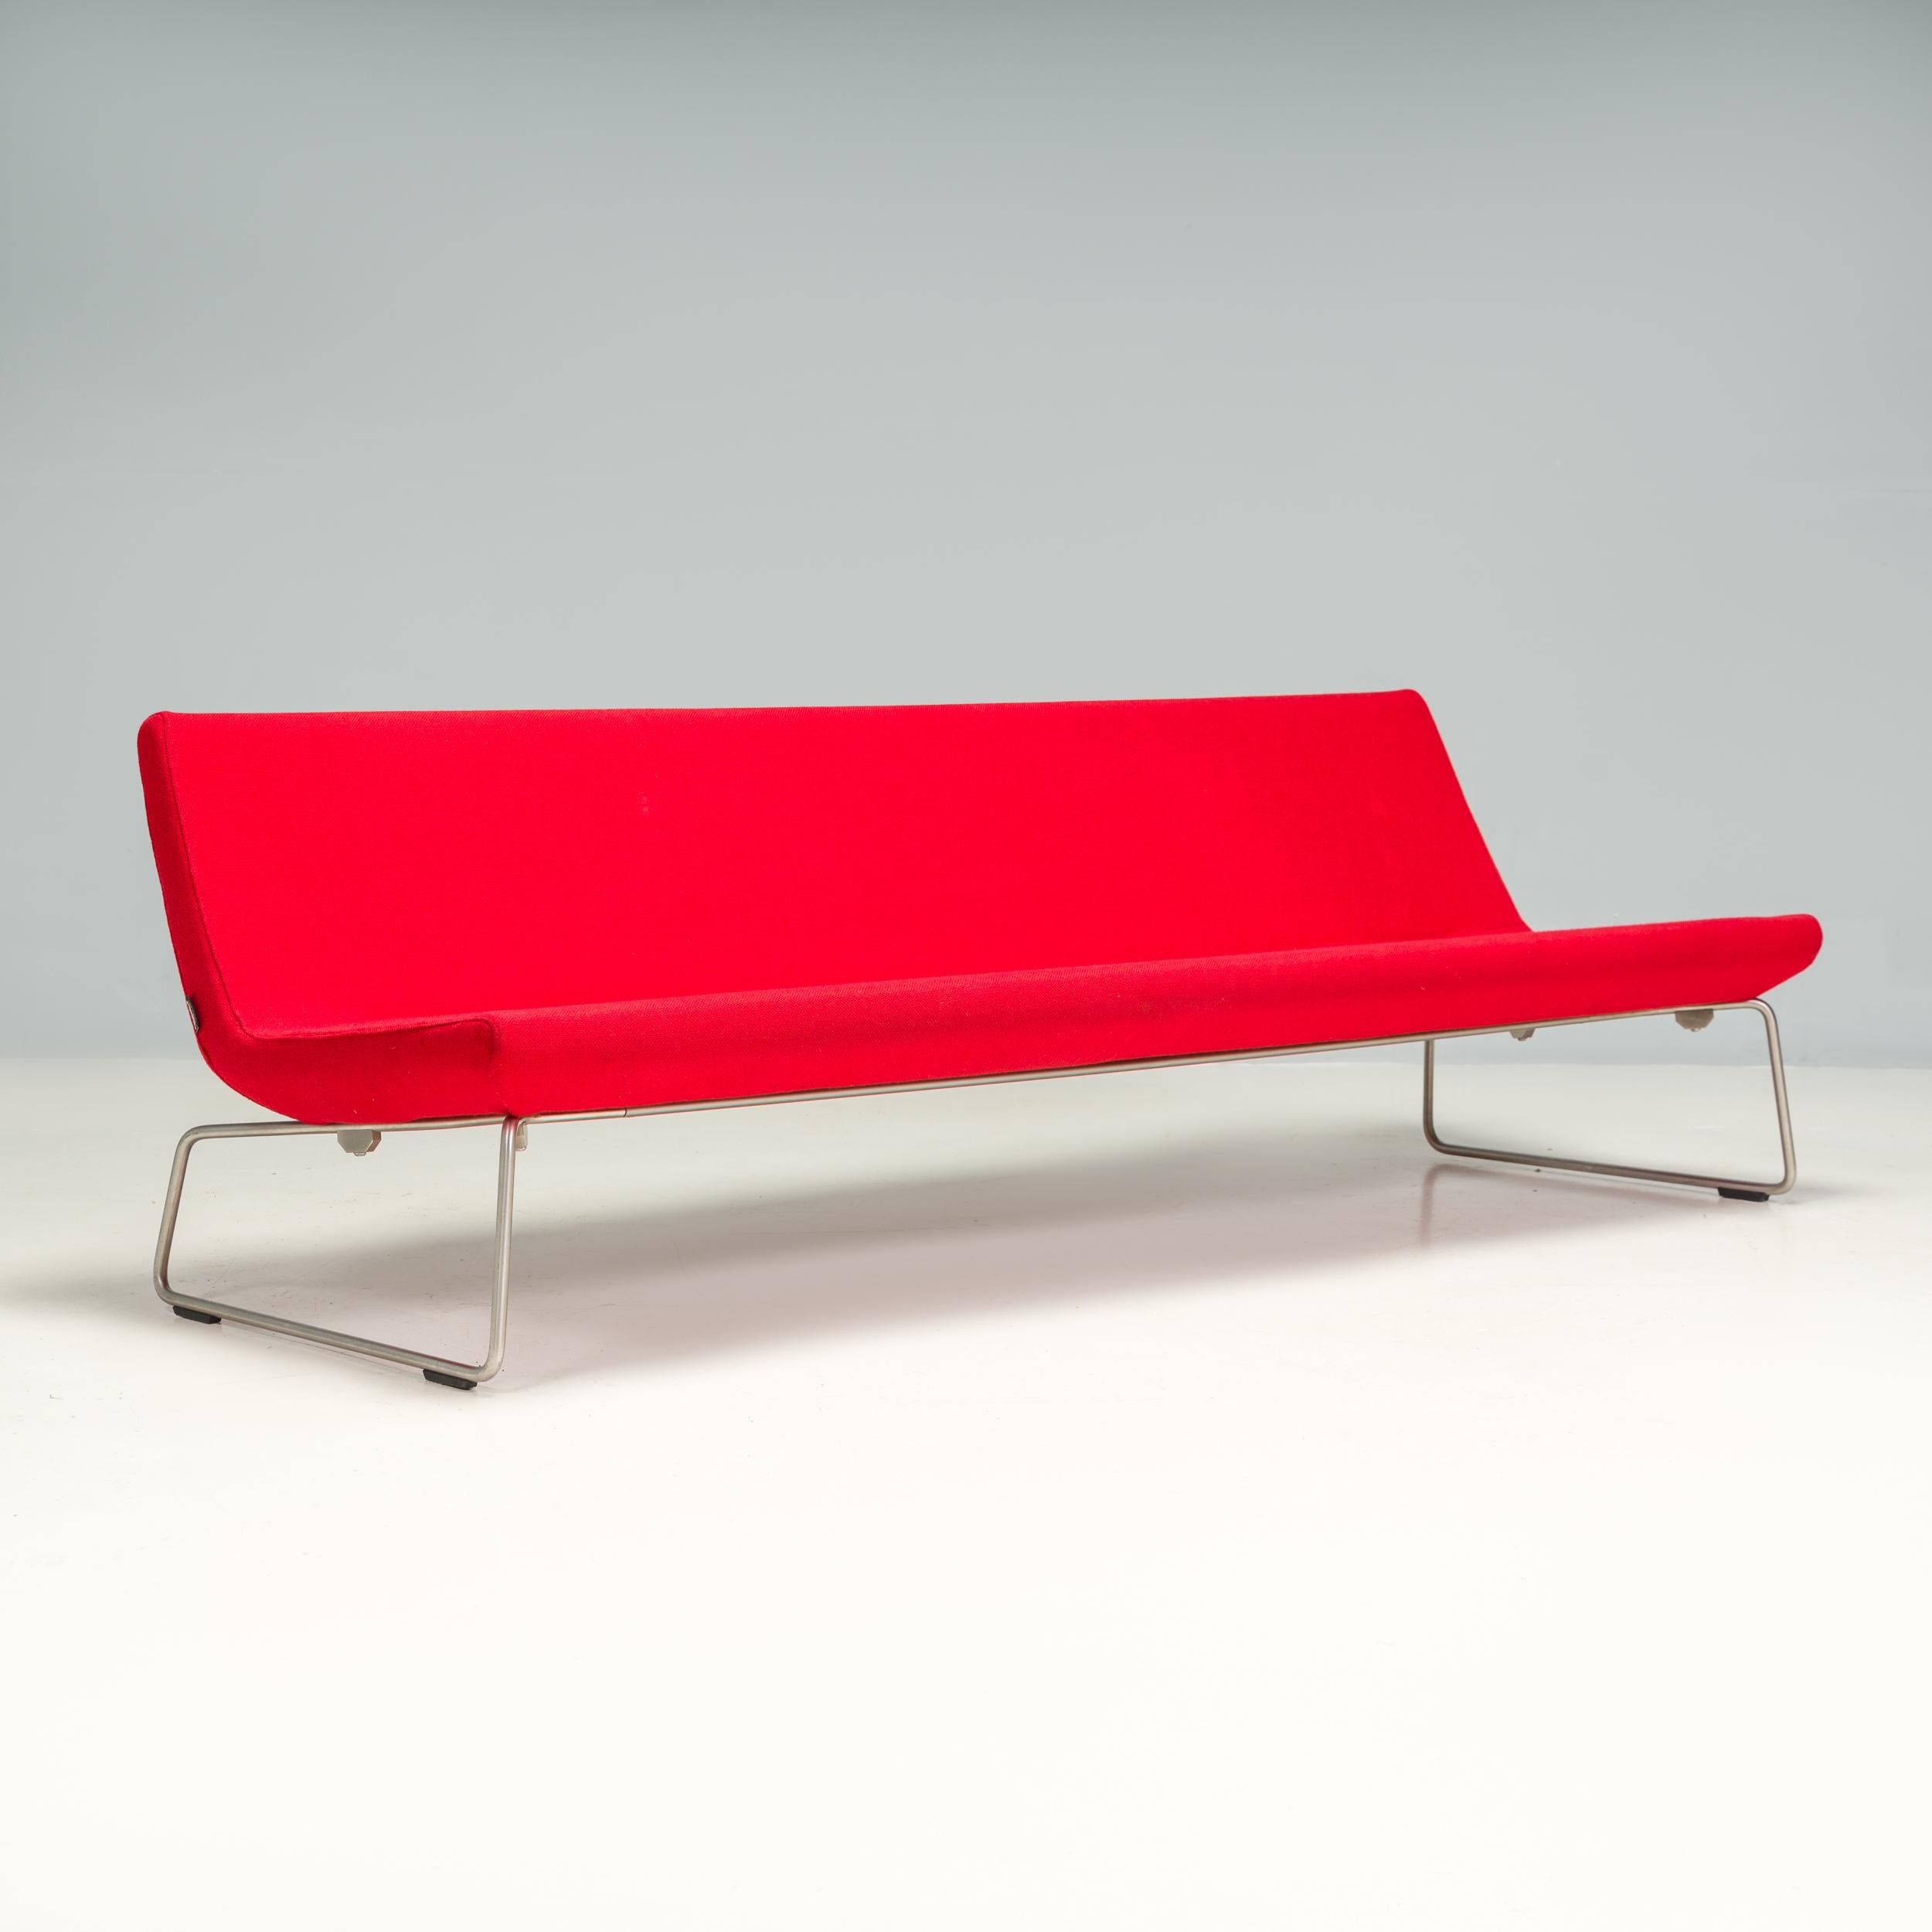 Originally designed by British industrial designers  Edward Barber and Jay Osgerby in 2000 and manufactured by Cappellini, the Superlight sofa is a fantastic example of minimalist, contemporary design.

With a bench-like silhouette, the Superlight